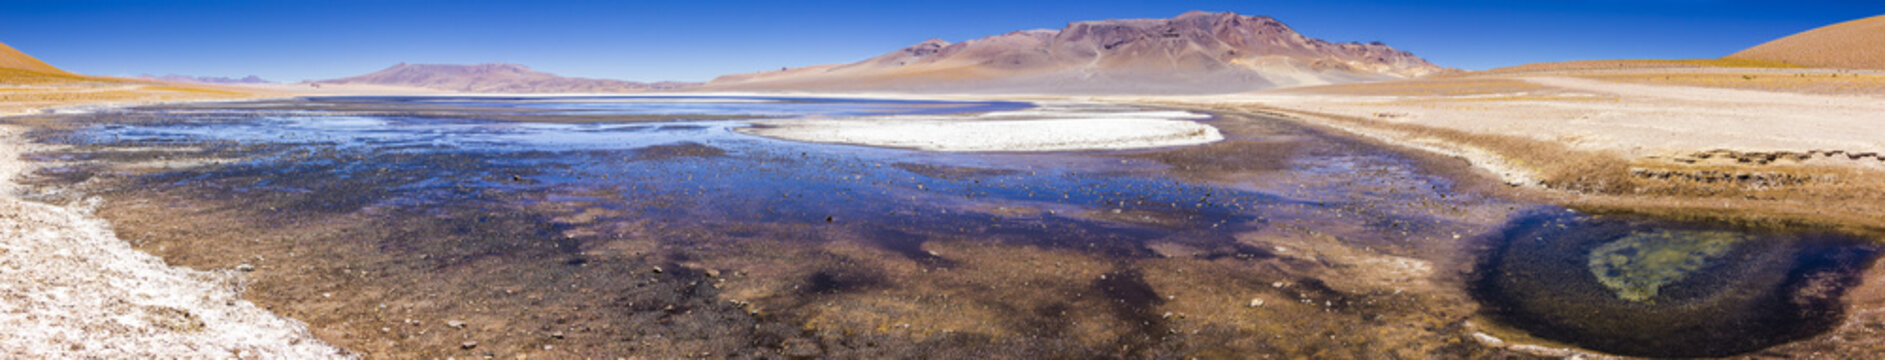 Salt lakes inside Atacama Desert at Chile in the middle of the Andes